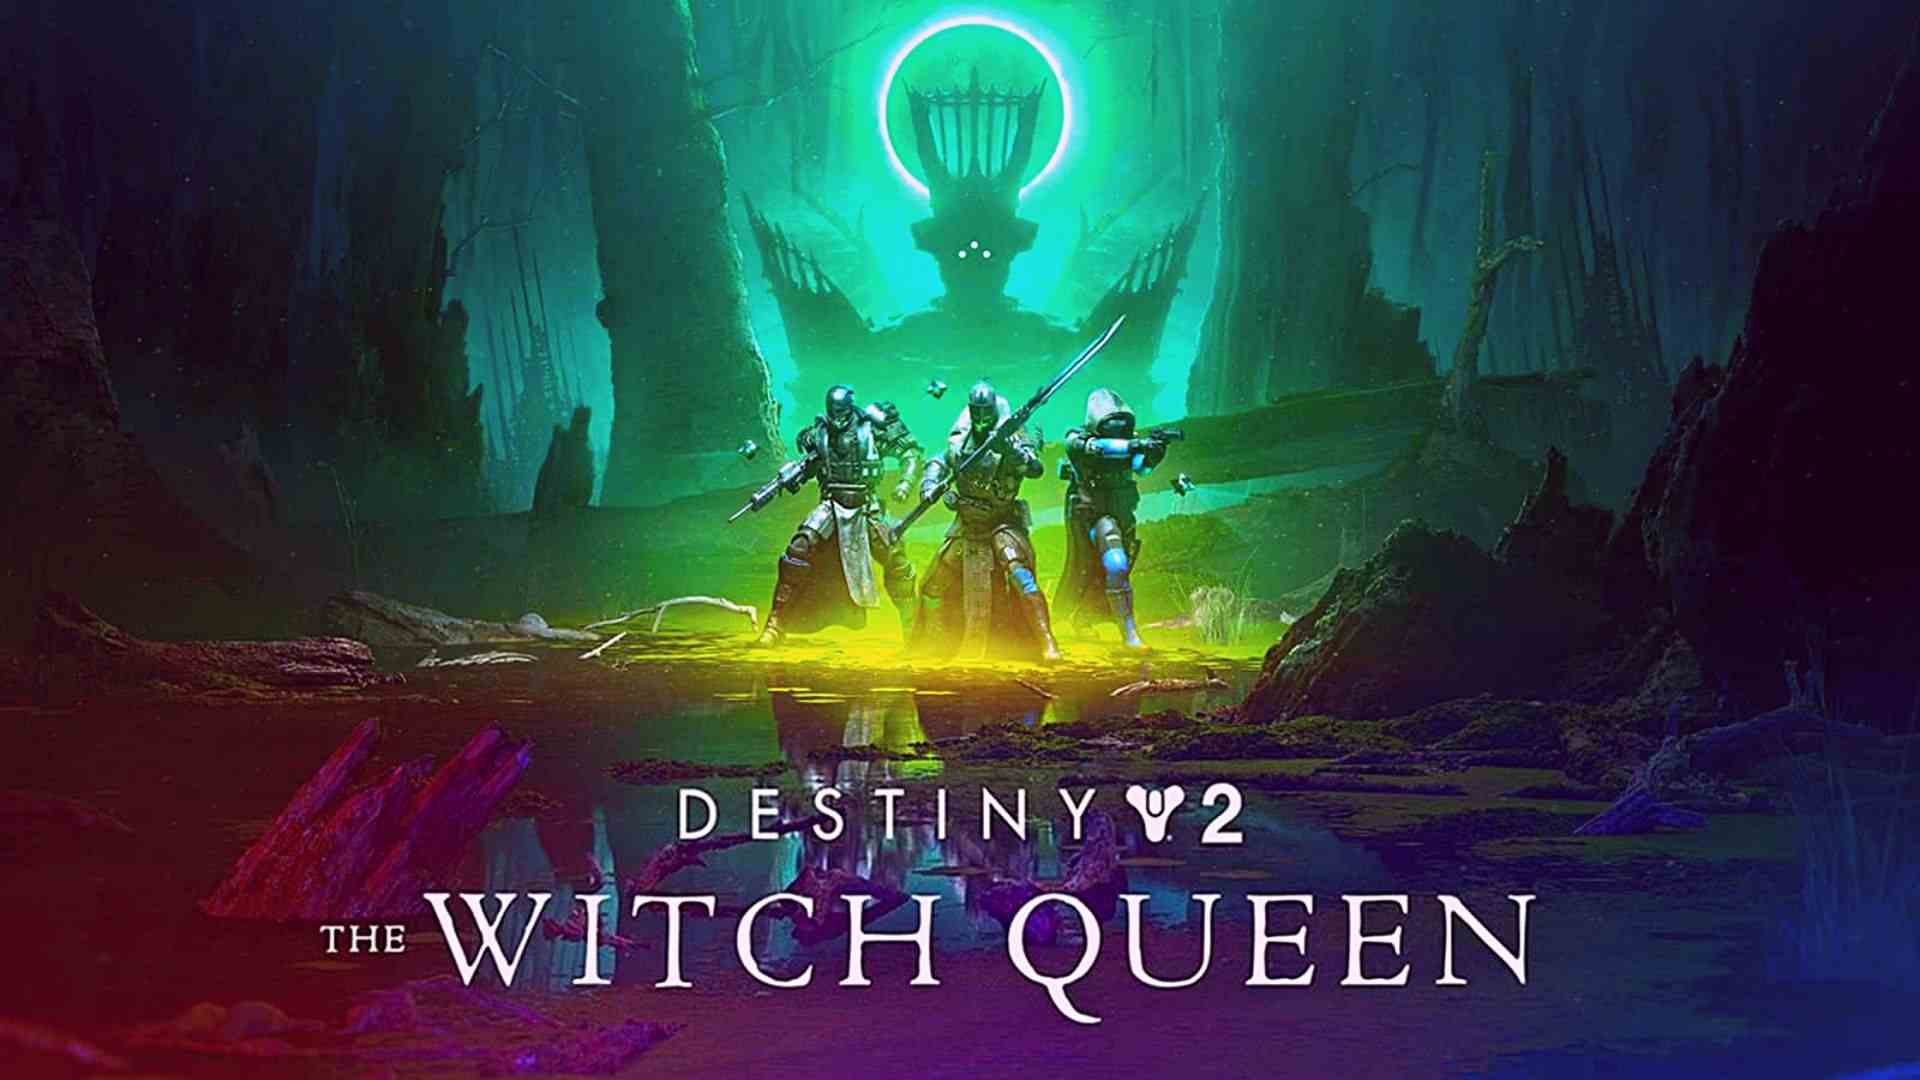 Destiny 2: The Witch Queen Age Rating and Parents Guide